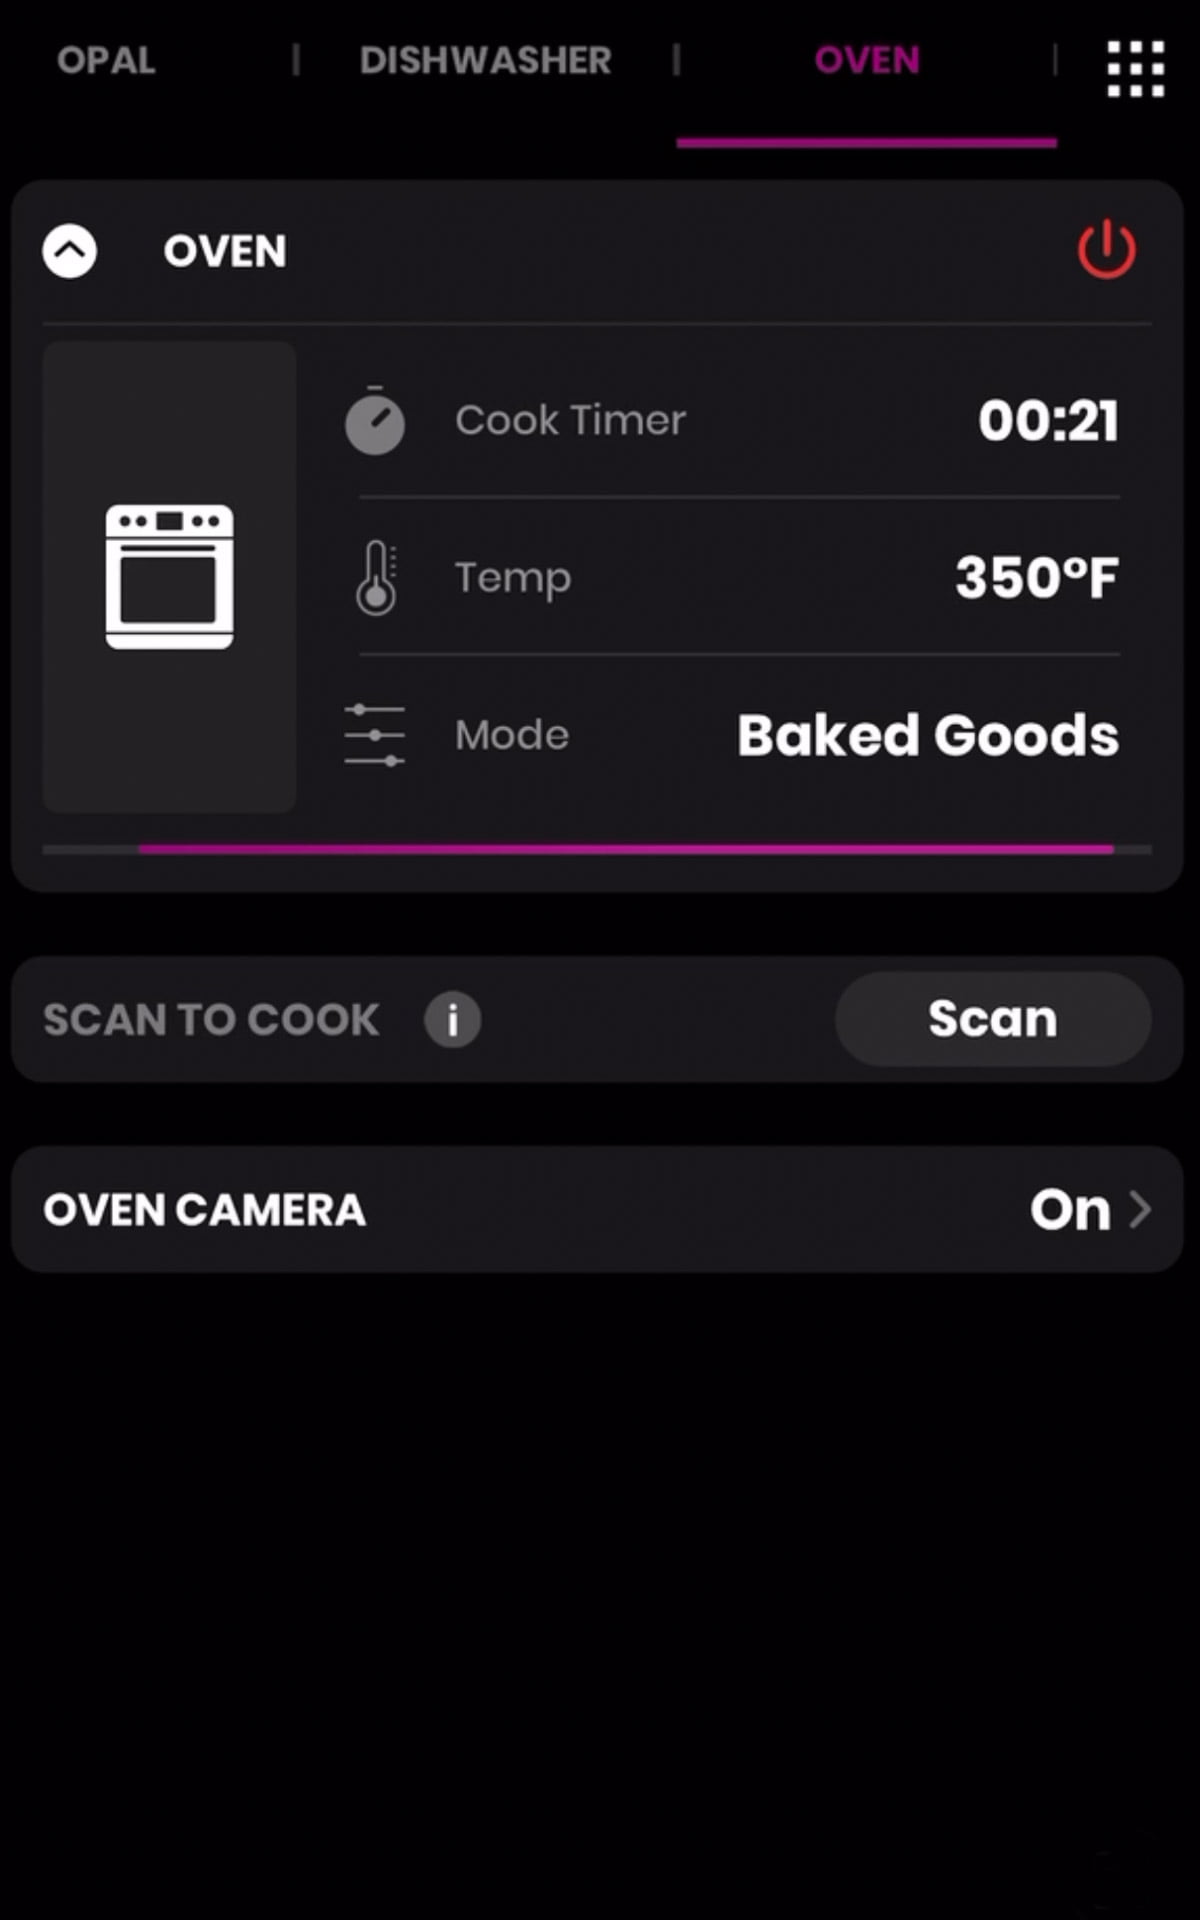 screen shot from my phone for the GeProfile oven